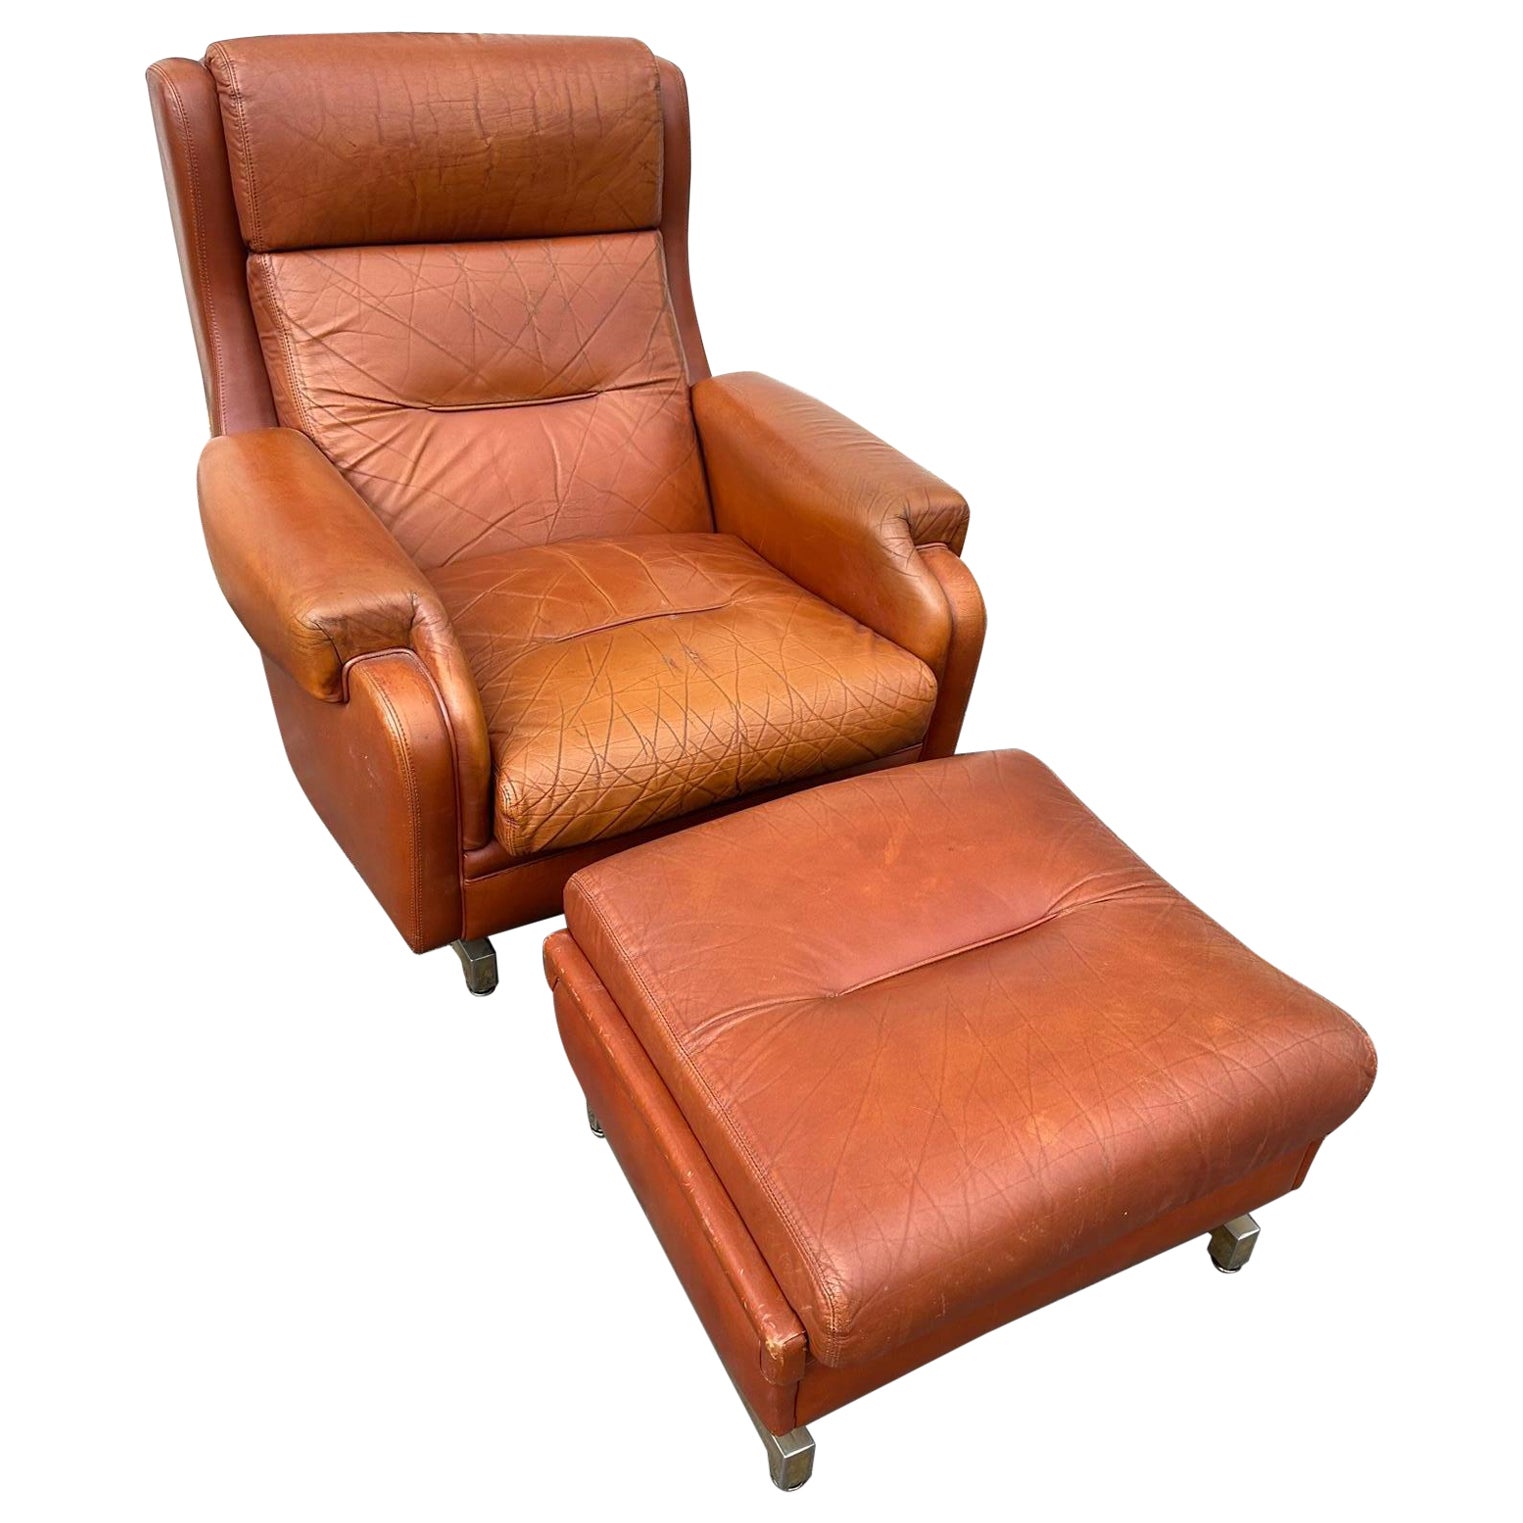 20th century French Jean Prevost Leather Armchair with Stool, 1970s